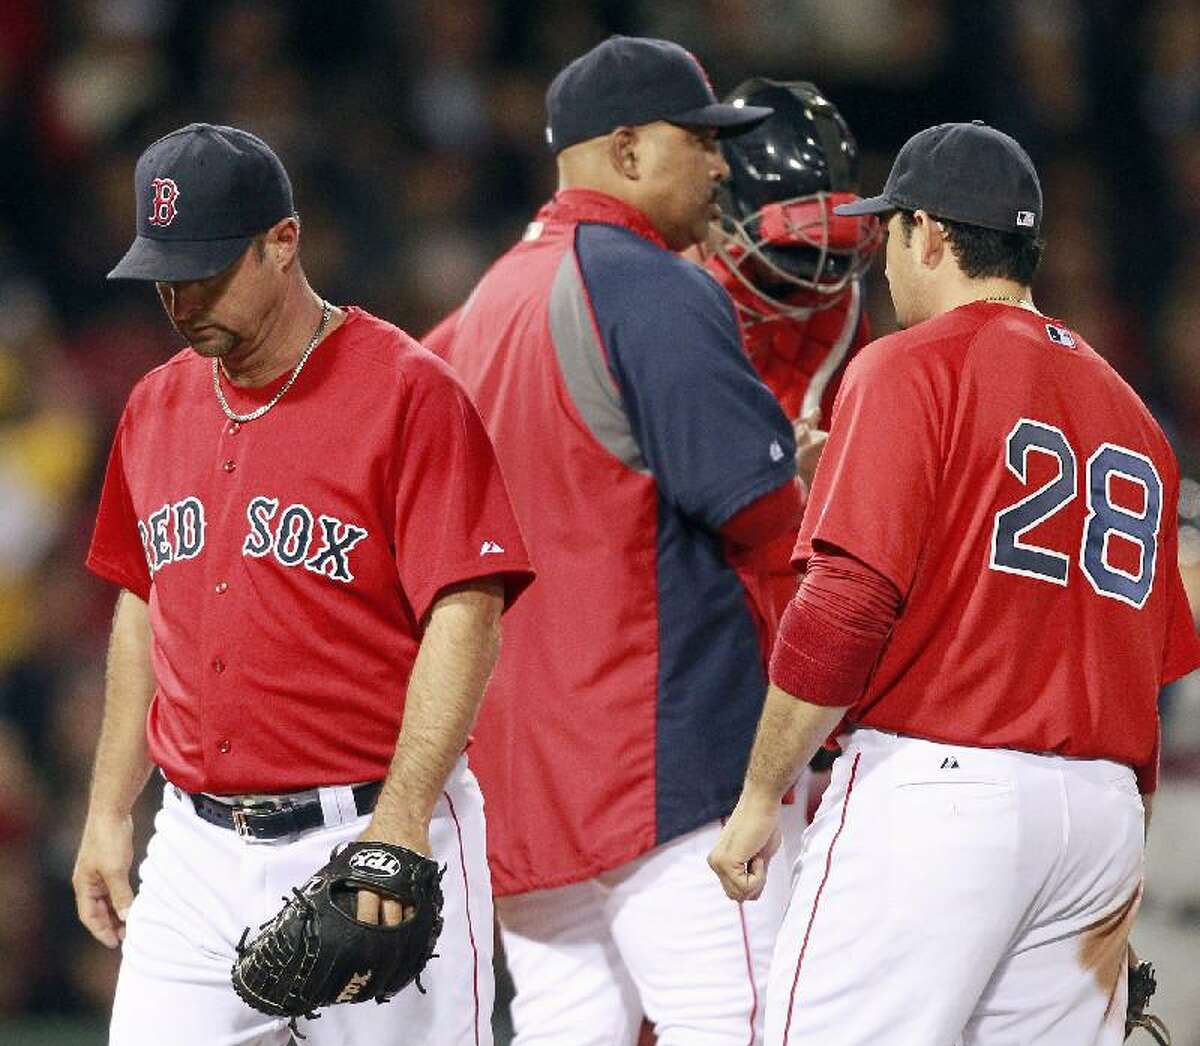 ASSOCIATED PRESS Boston Red Sox starting pitcher Tim Wakefield, left, walks back to the dugout after being taken out of the game by bench coach Demarlo Hale, center, in the fifth inning of Friday's game against the Minnesota Twins at Fenway Park in Boston. The Red Sox lost 9-2.